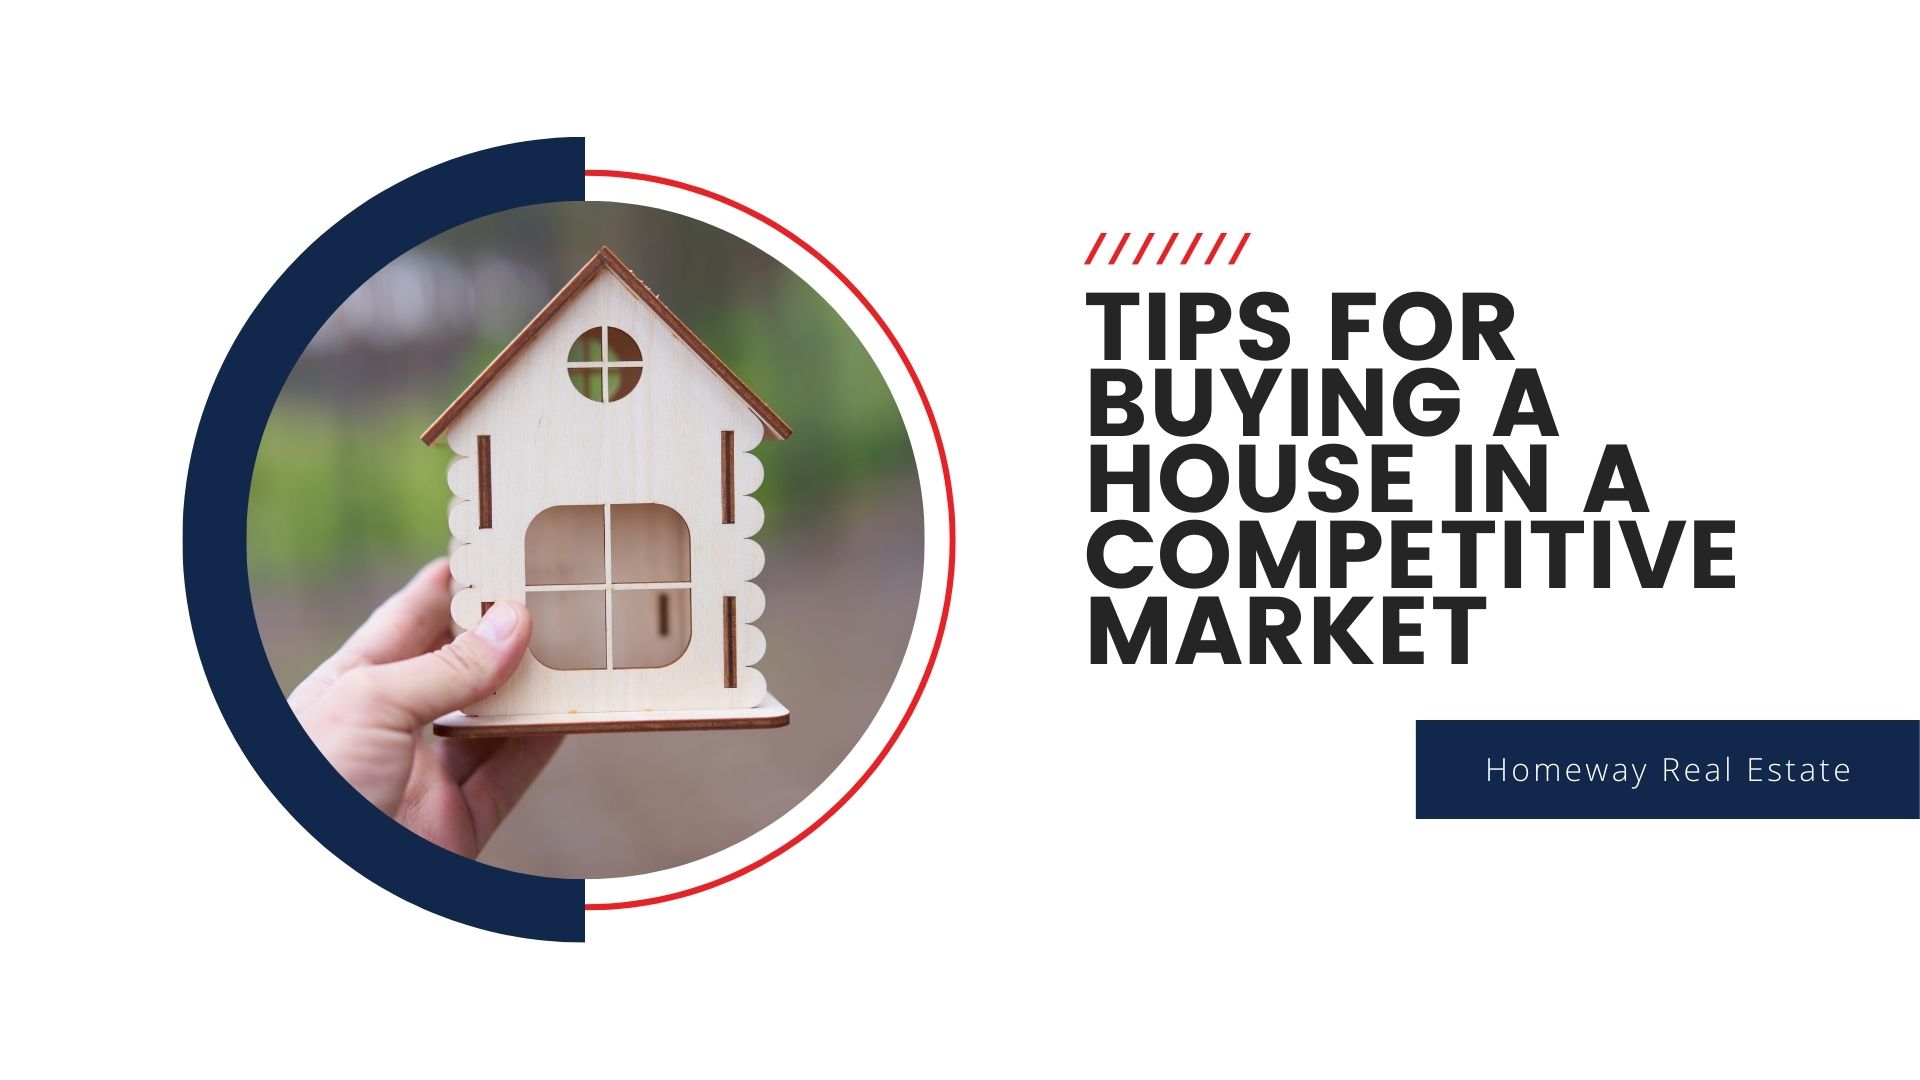 Tips for Buying a House in a Competitive Market